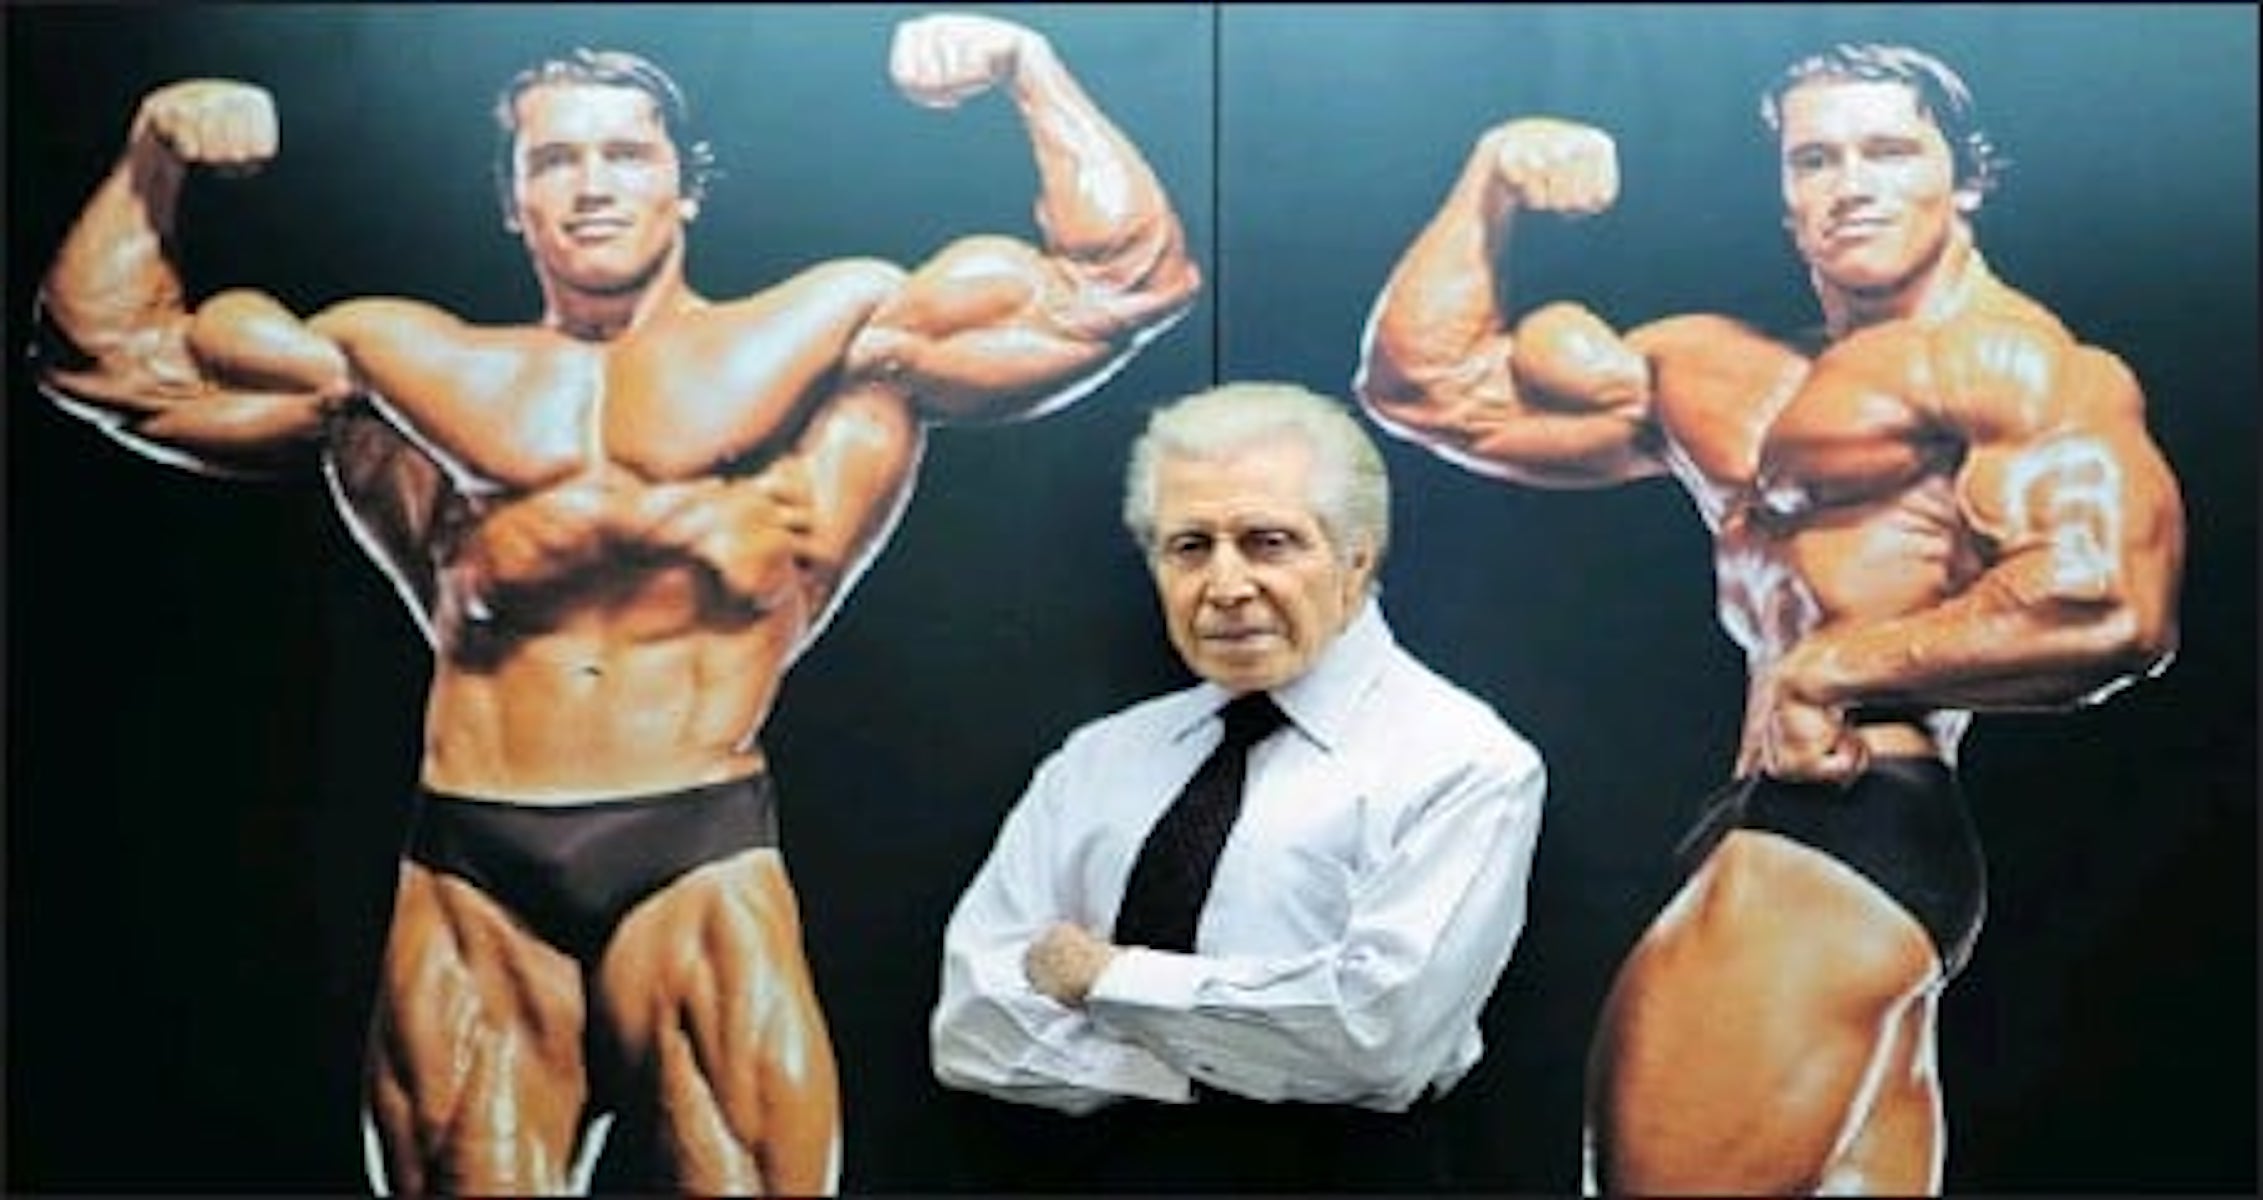 Legendary Bodybuilding Photographer Jimmy Caruso Dies At 95 Years Old